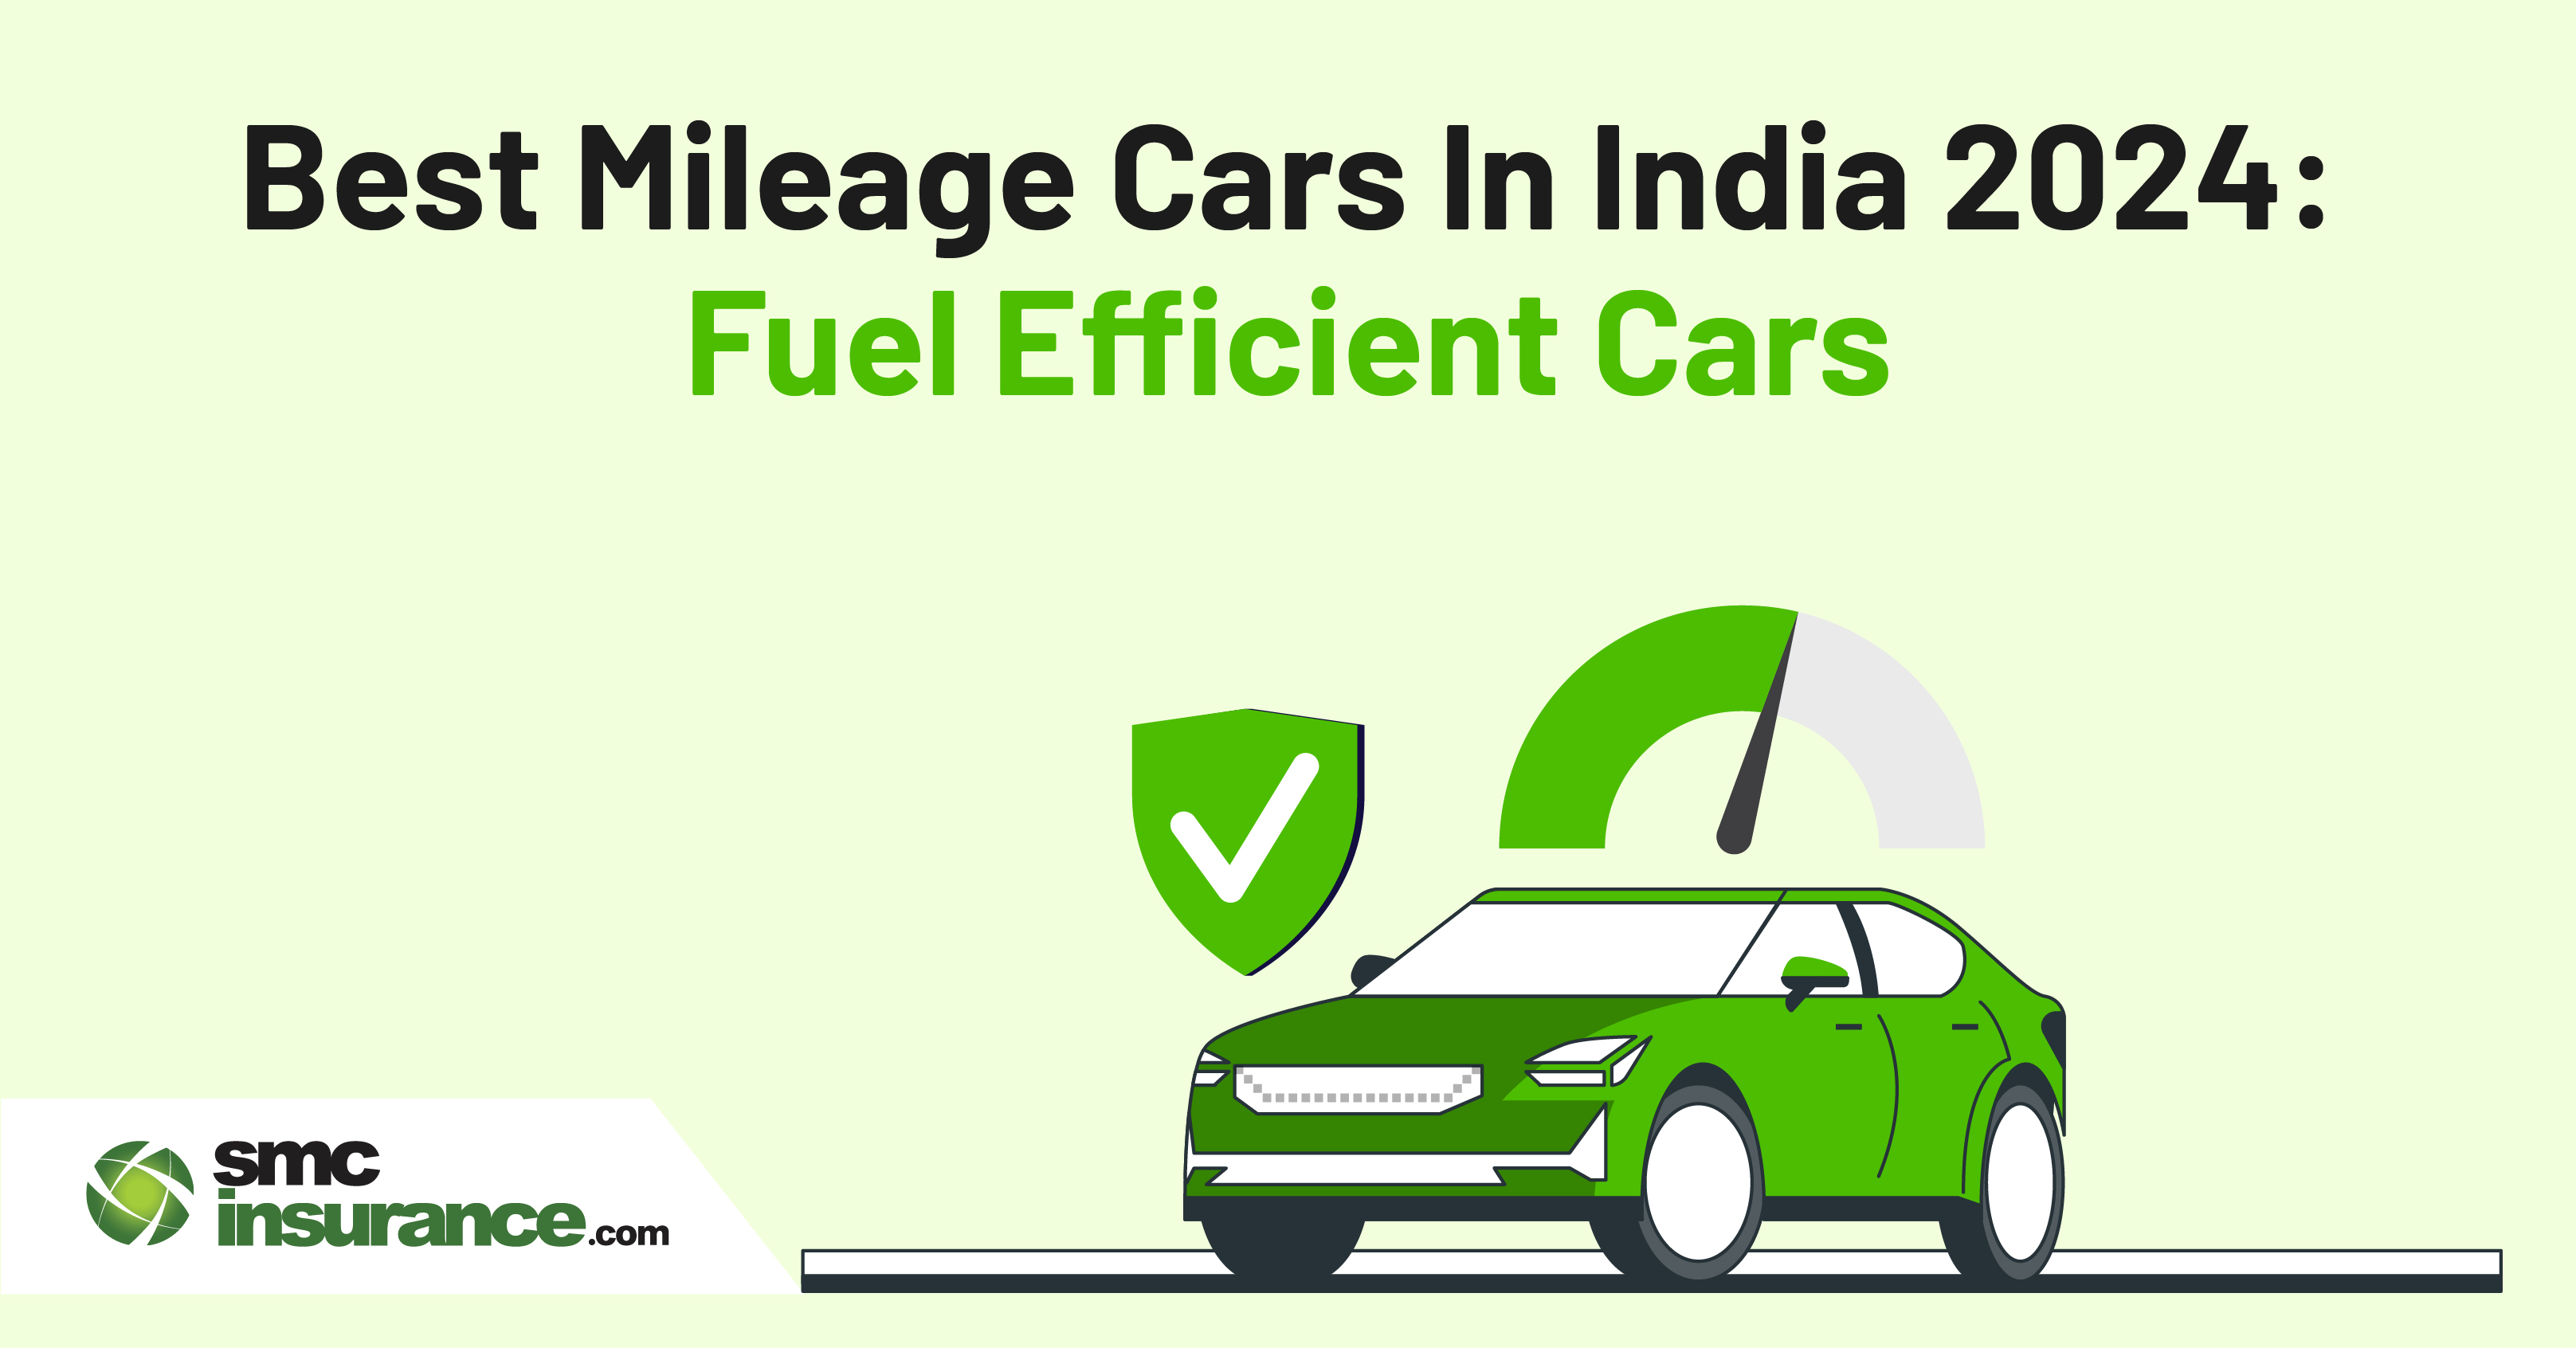 Top Fuel-Efficient Cars In India 2024: The Best Mileage Cars